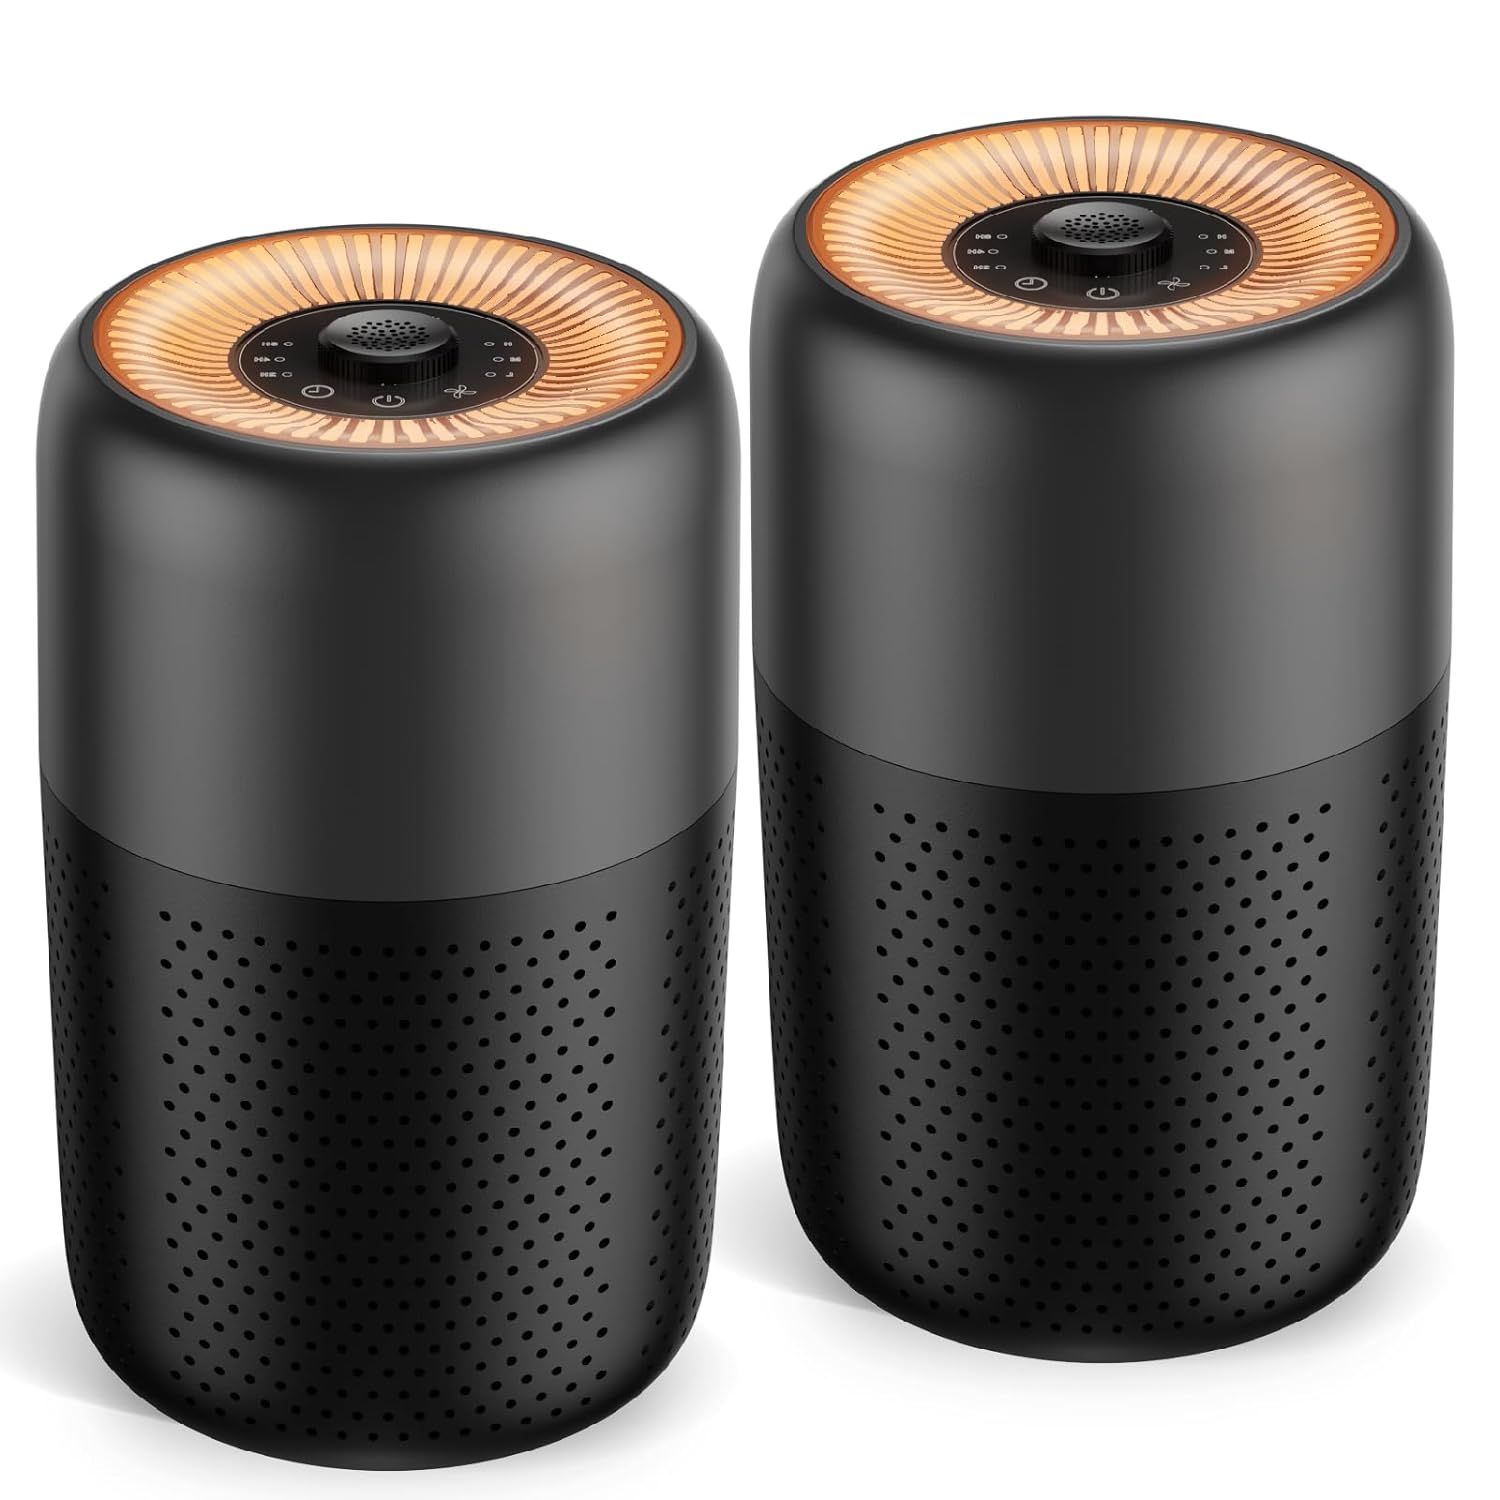 2 Pack TPLMB Air Purifiers for Bedroom,H13 HEPA Filters,Fragrance Sponge for Better Sleep,For Dust Smoke Hair Wildfire Particles,24dB Filtration System, P60 (Black)